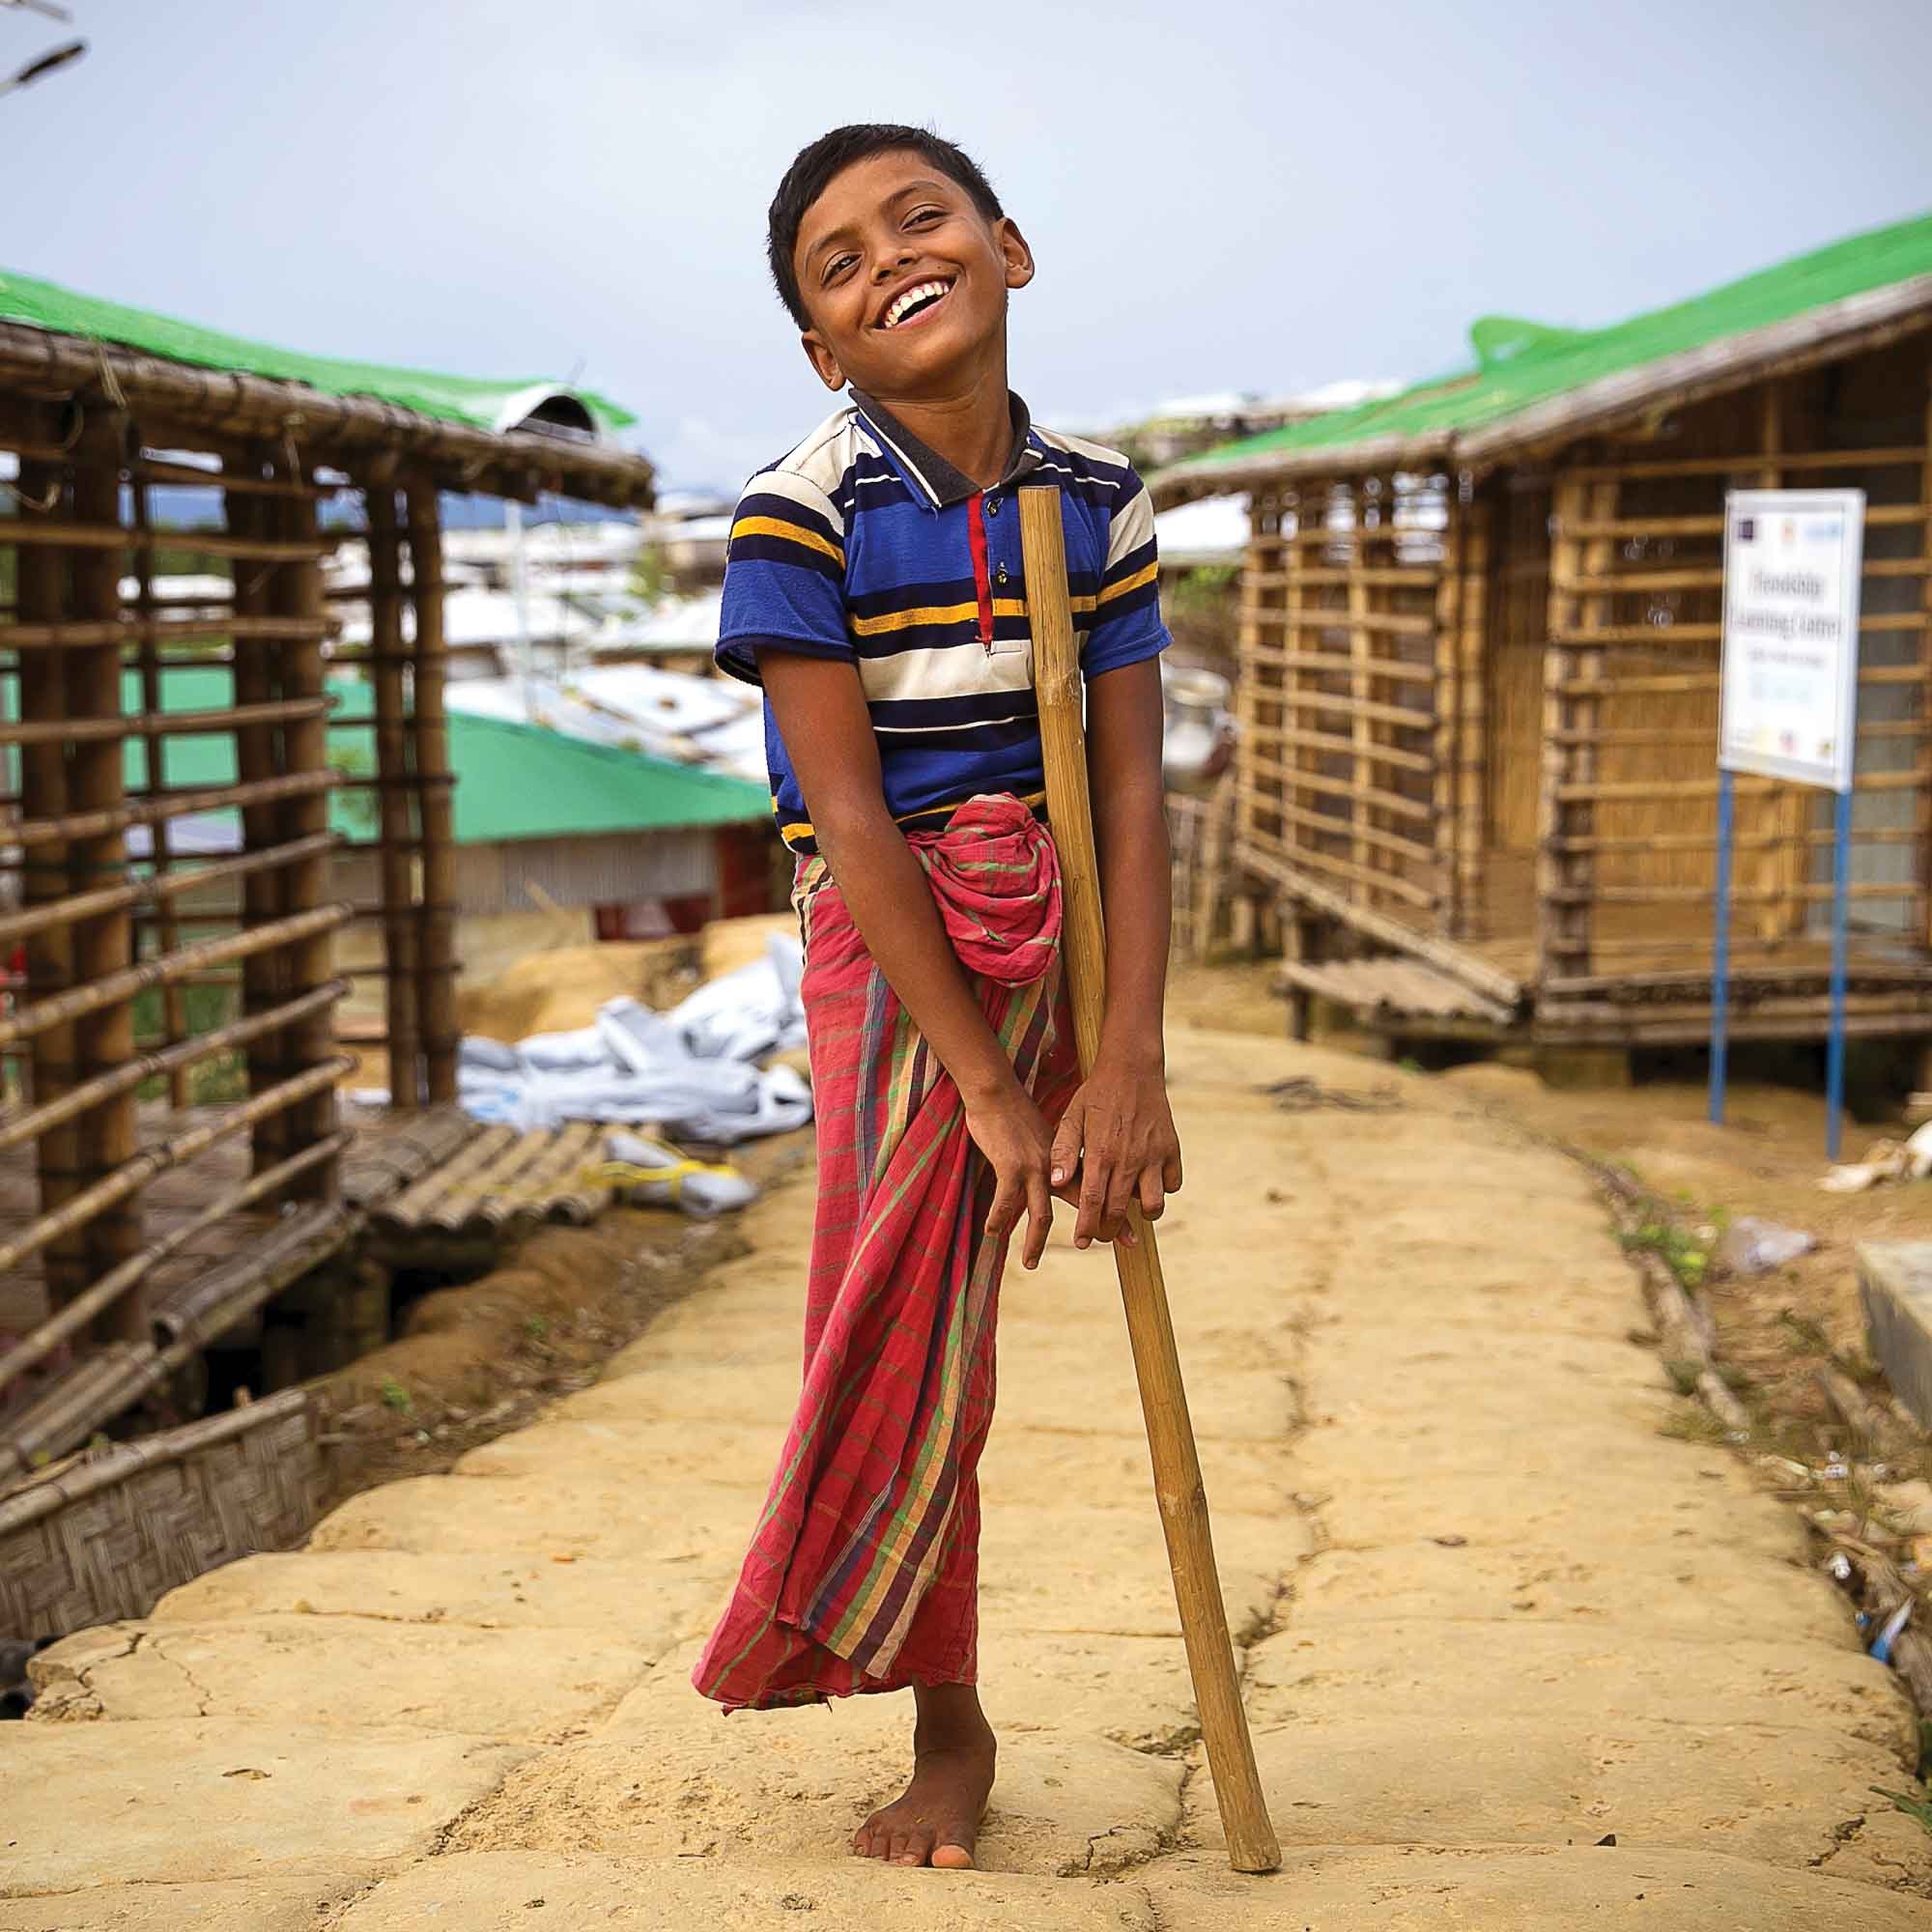 A boy stands and smiles while standing on one leg in Cox's Bazar, Bangladesh.